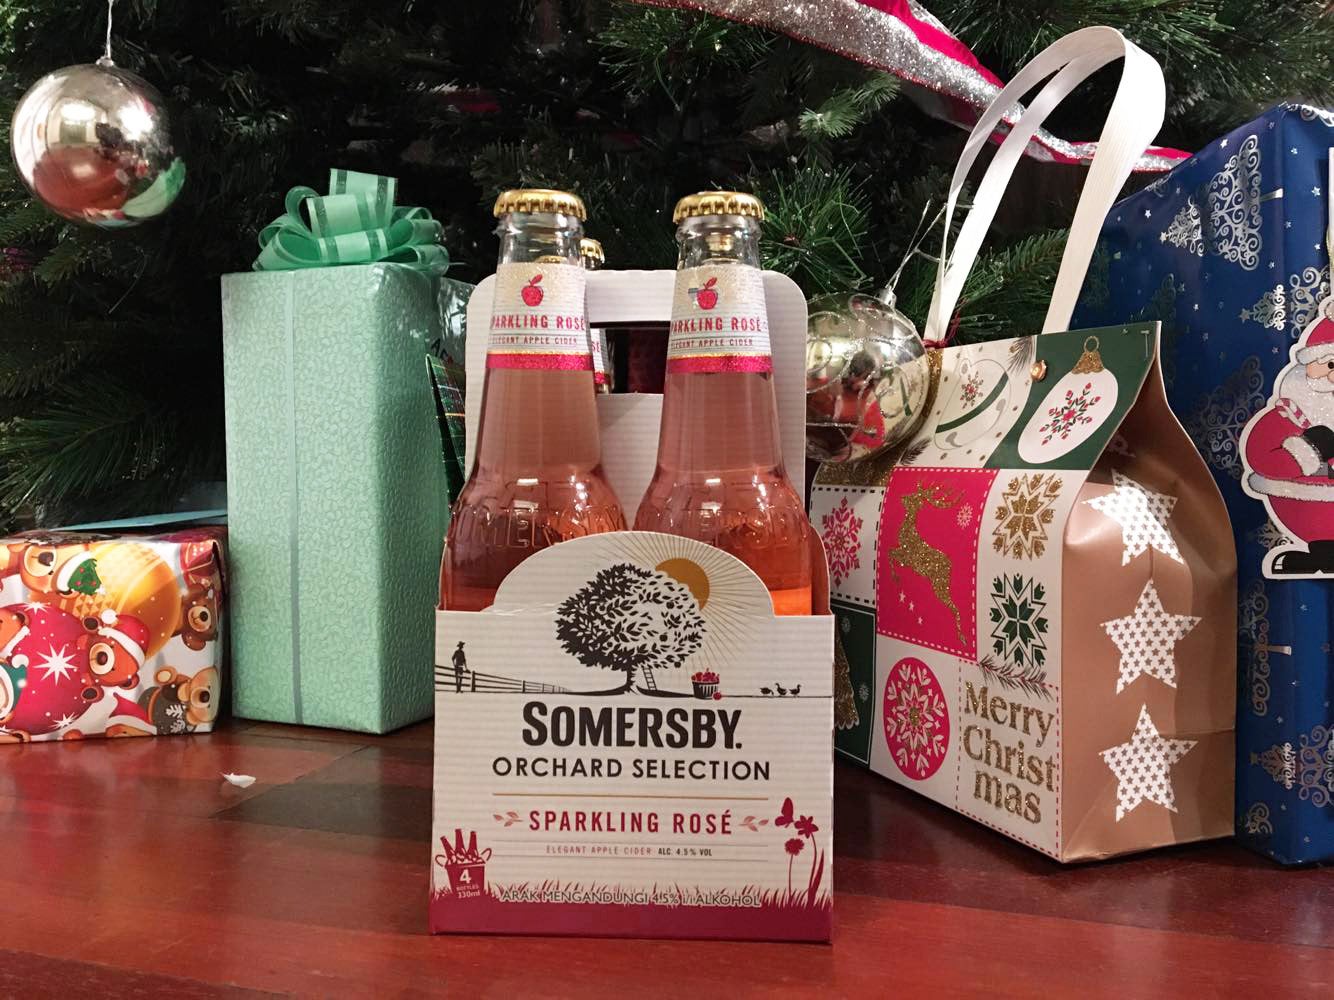 Somersby Just Released Their Limited-Edition Sparkling Rosé And We Tried It Out! - World Of Buzz 3